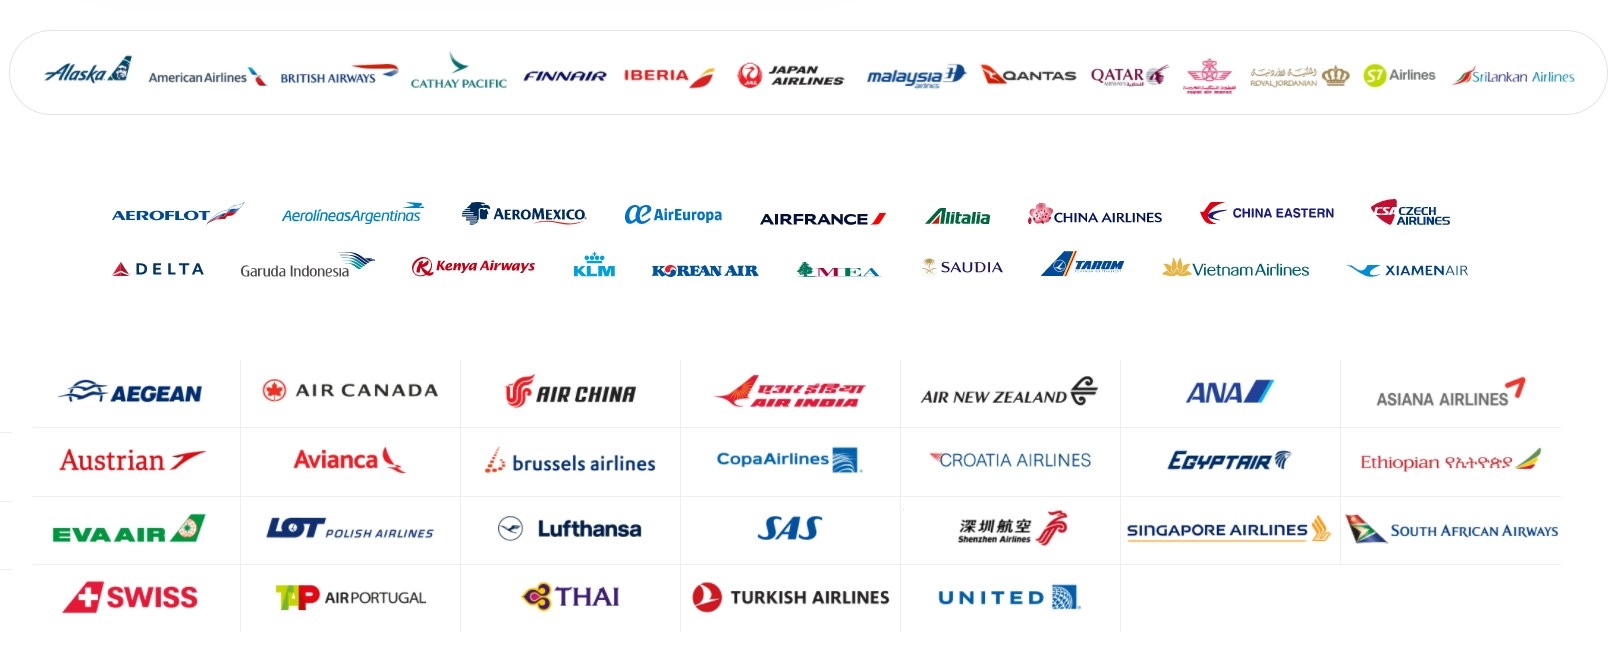 Screenshot of the airlines associated with the 3 major airline alliances